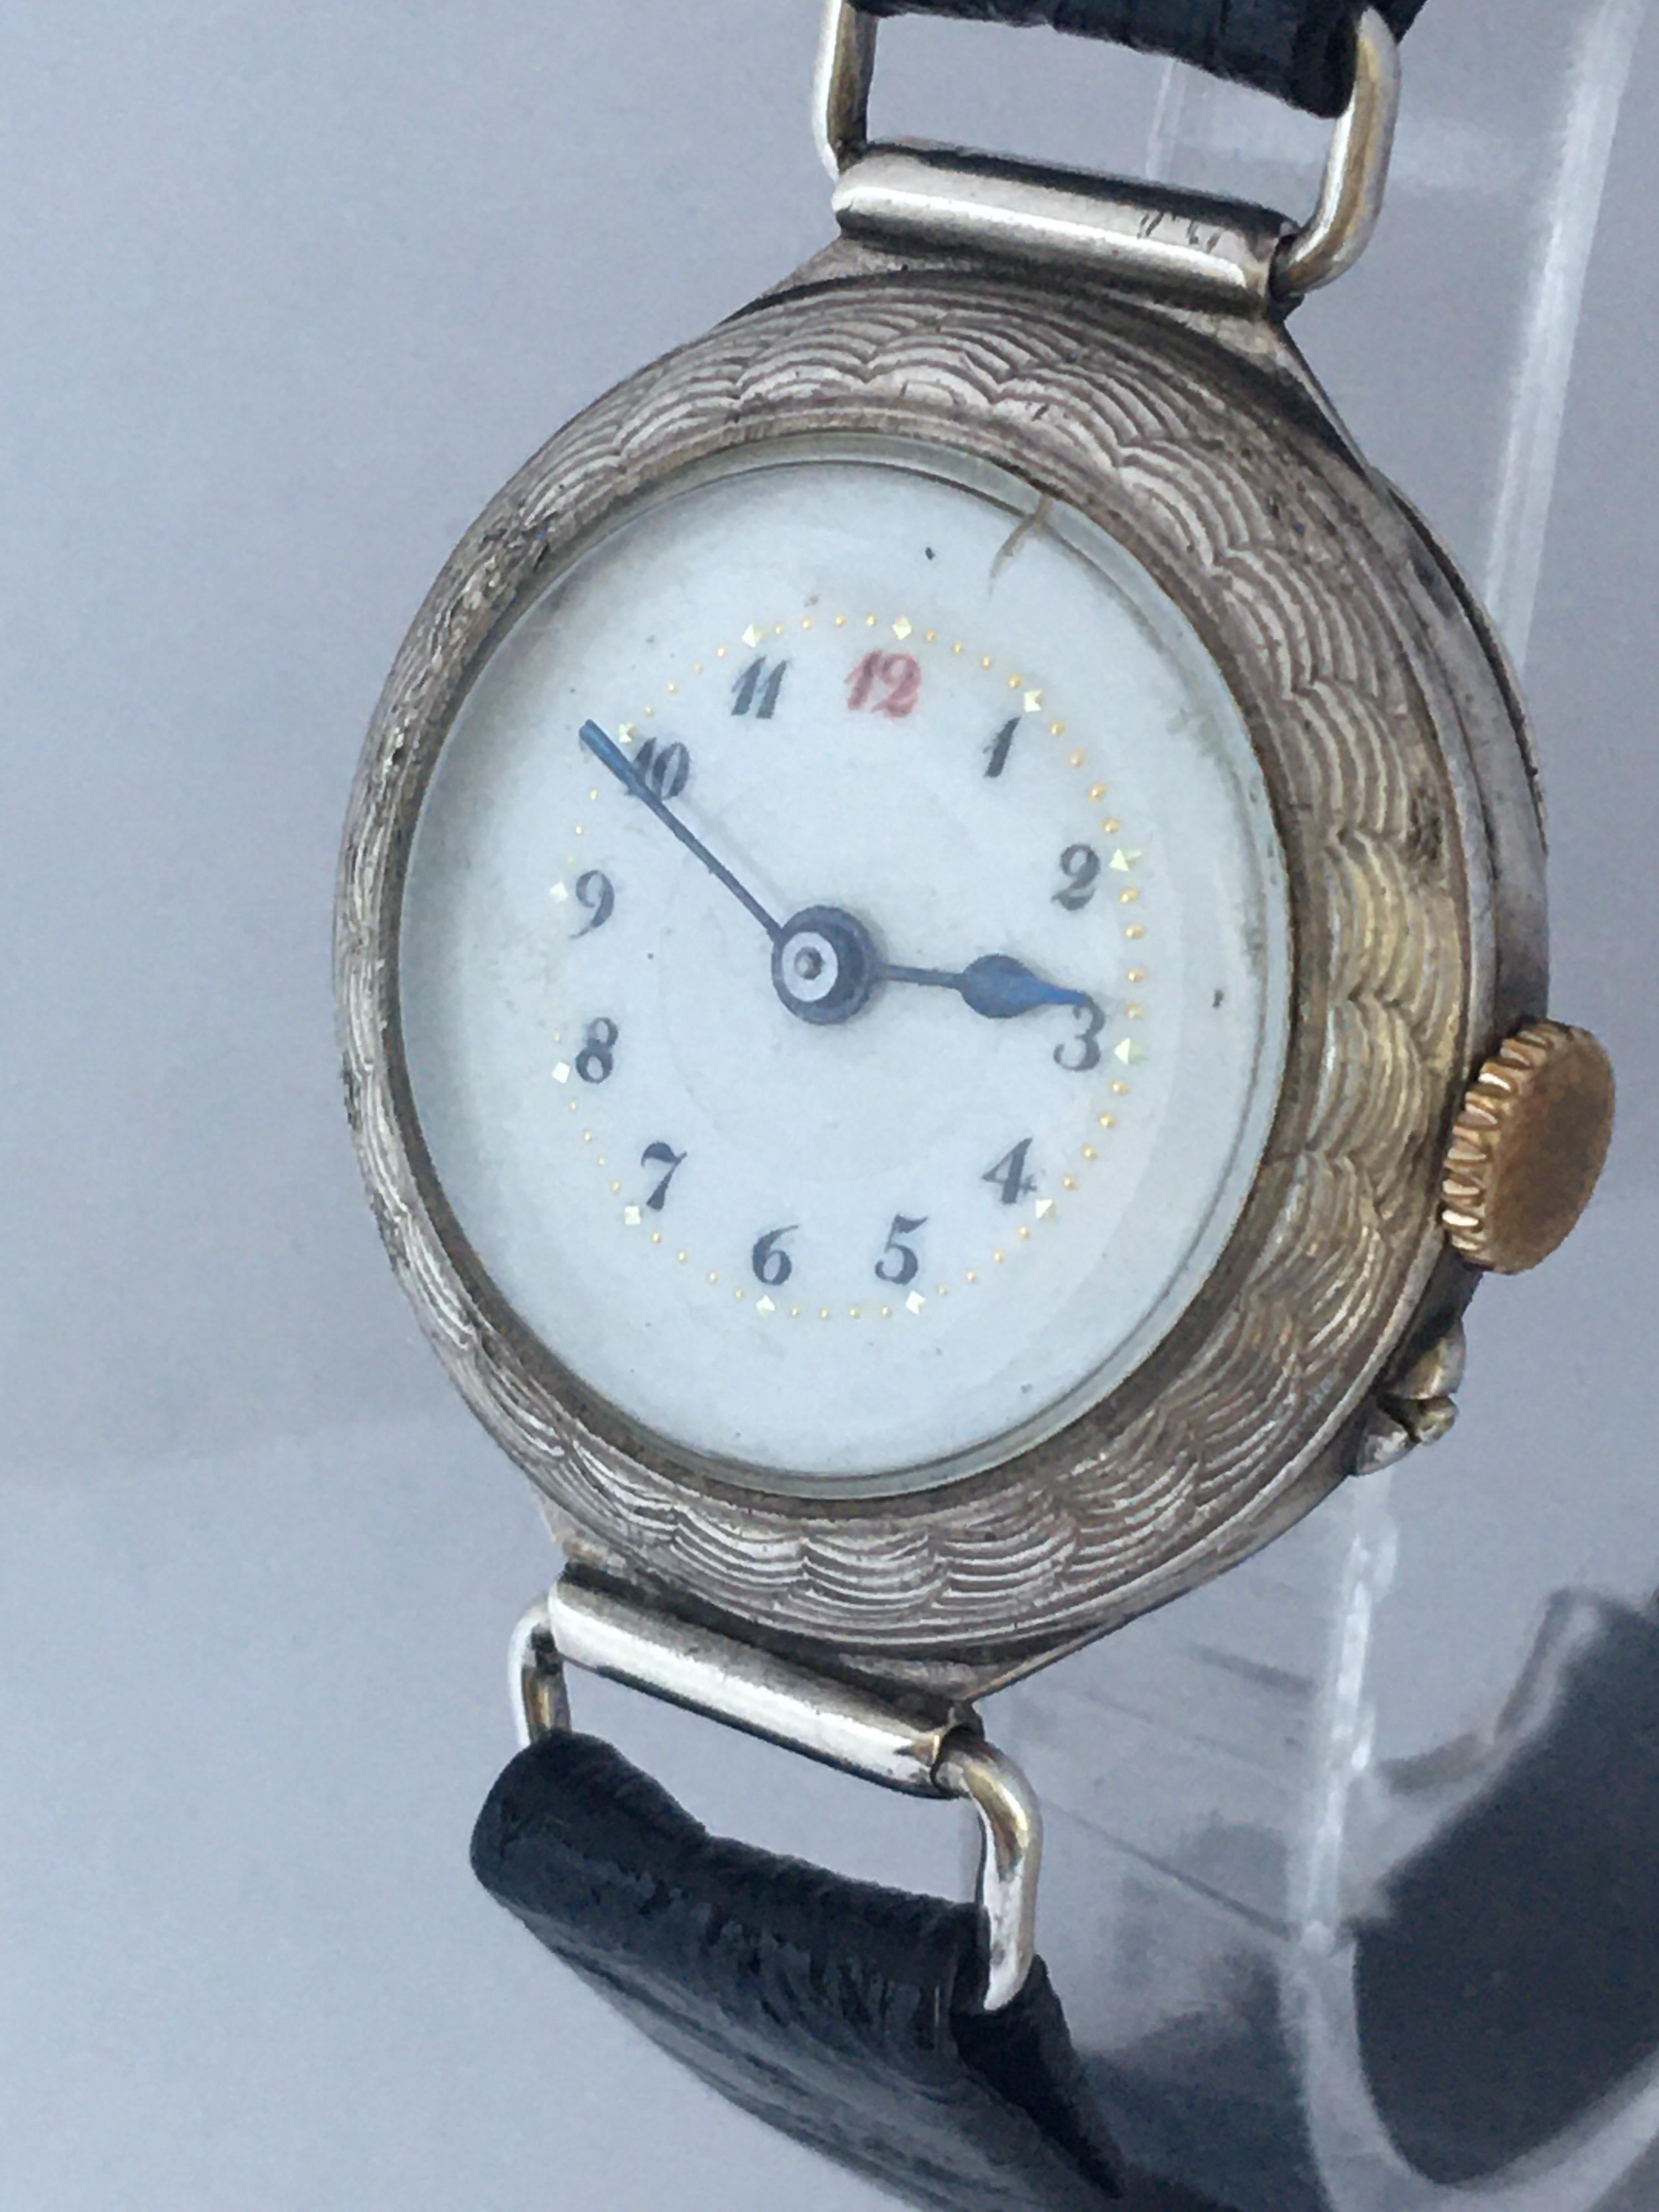 This beautiful antique hand winding pin setting Ladies Trench watch is working and it is ticking well, but I cannot guarantee the time accuracy. Visible signs of ageing and wear with tiny crack on the glass between 12 o’clock and 1 o’clock as shown.